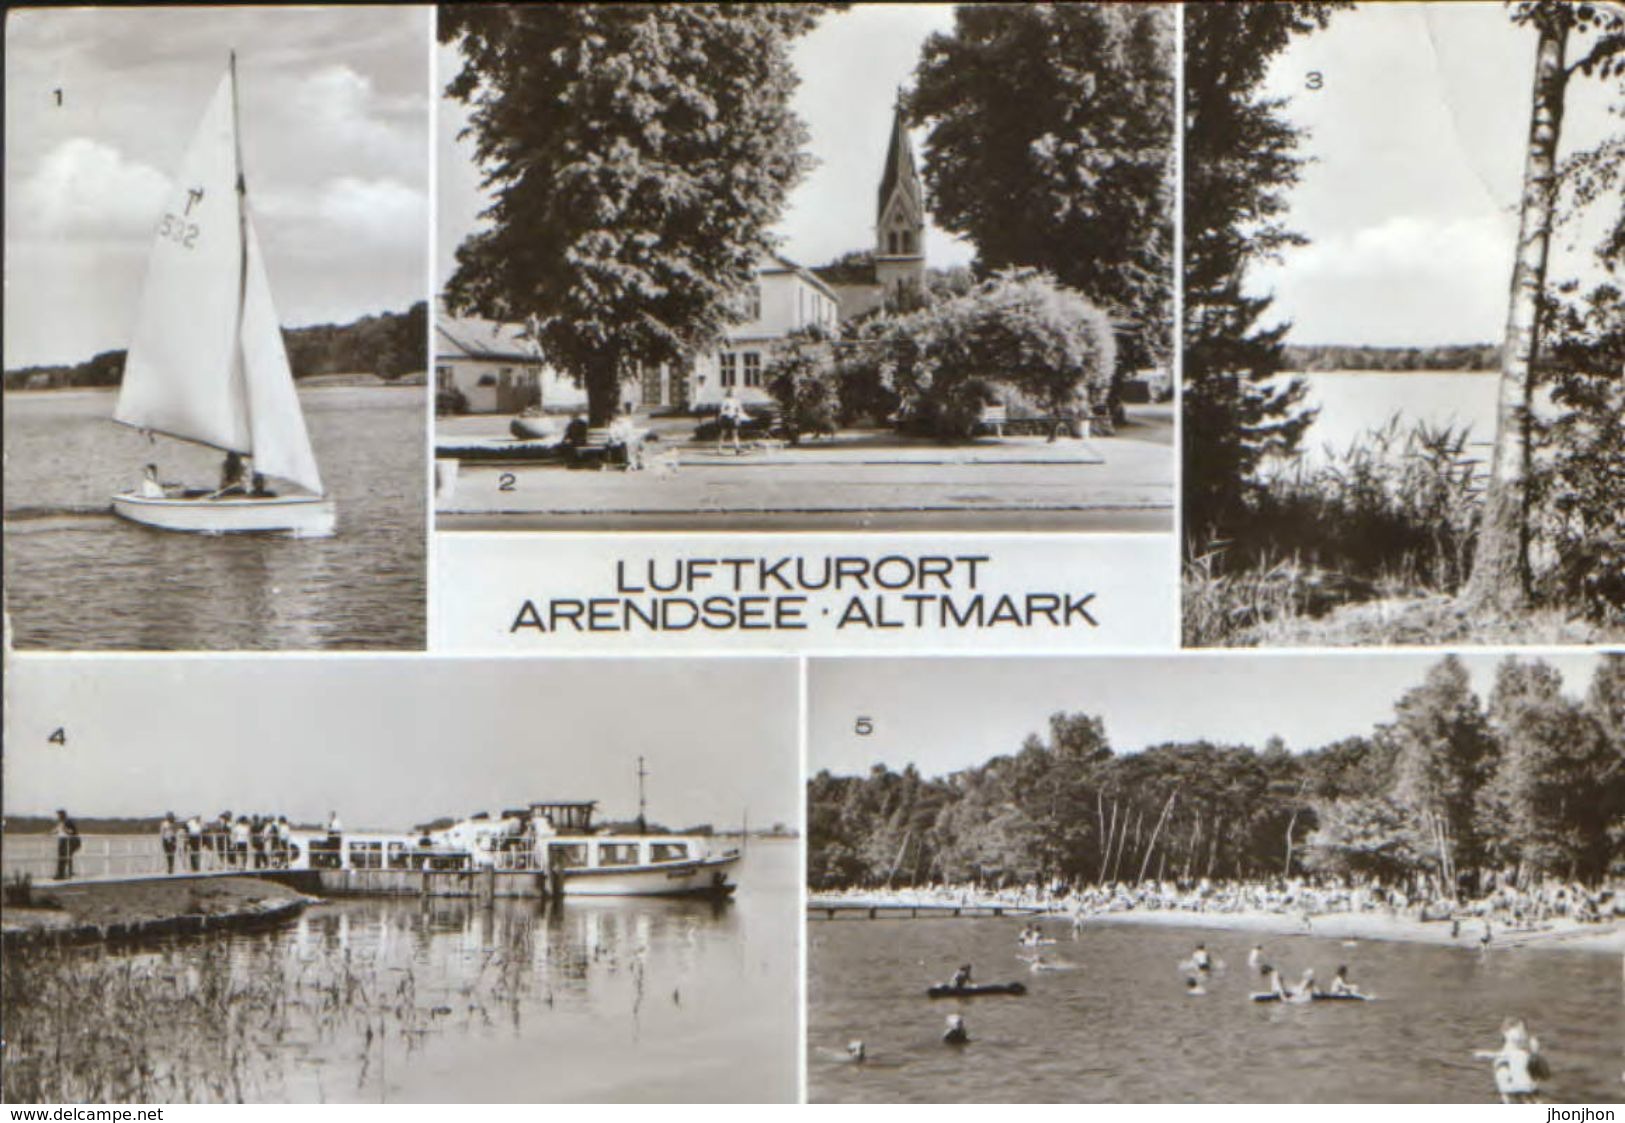 Germany - Postcard Circulated In 1980 - Arendsee,Altmark - Collage Of Images - 2/scan - Osterburg